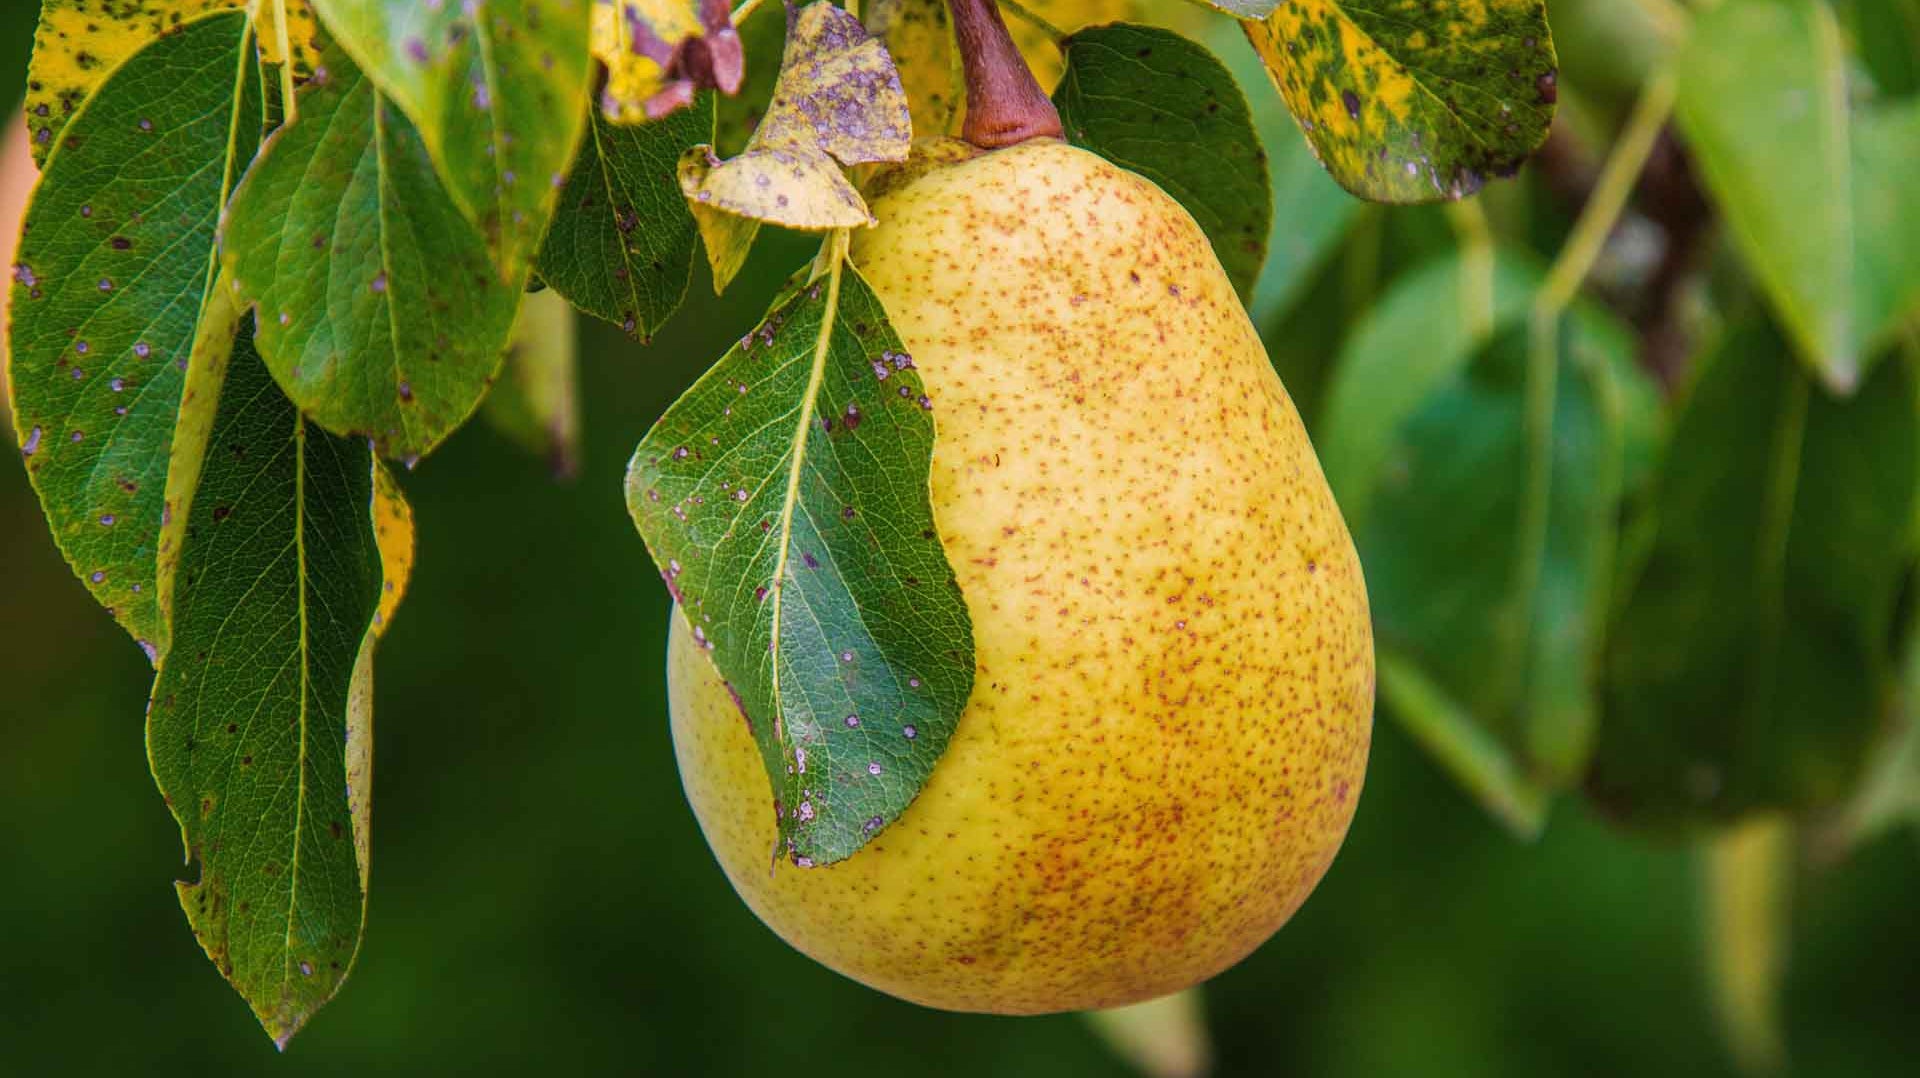 How to grow your own pear tree from seed